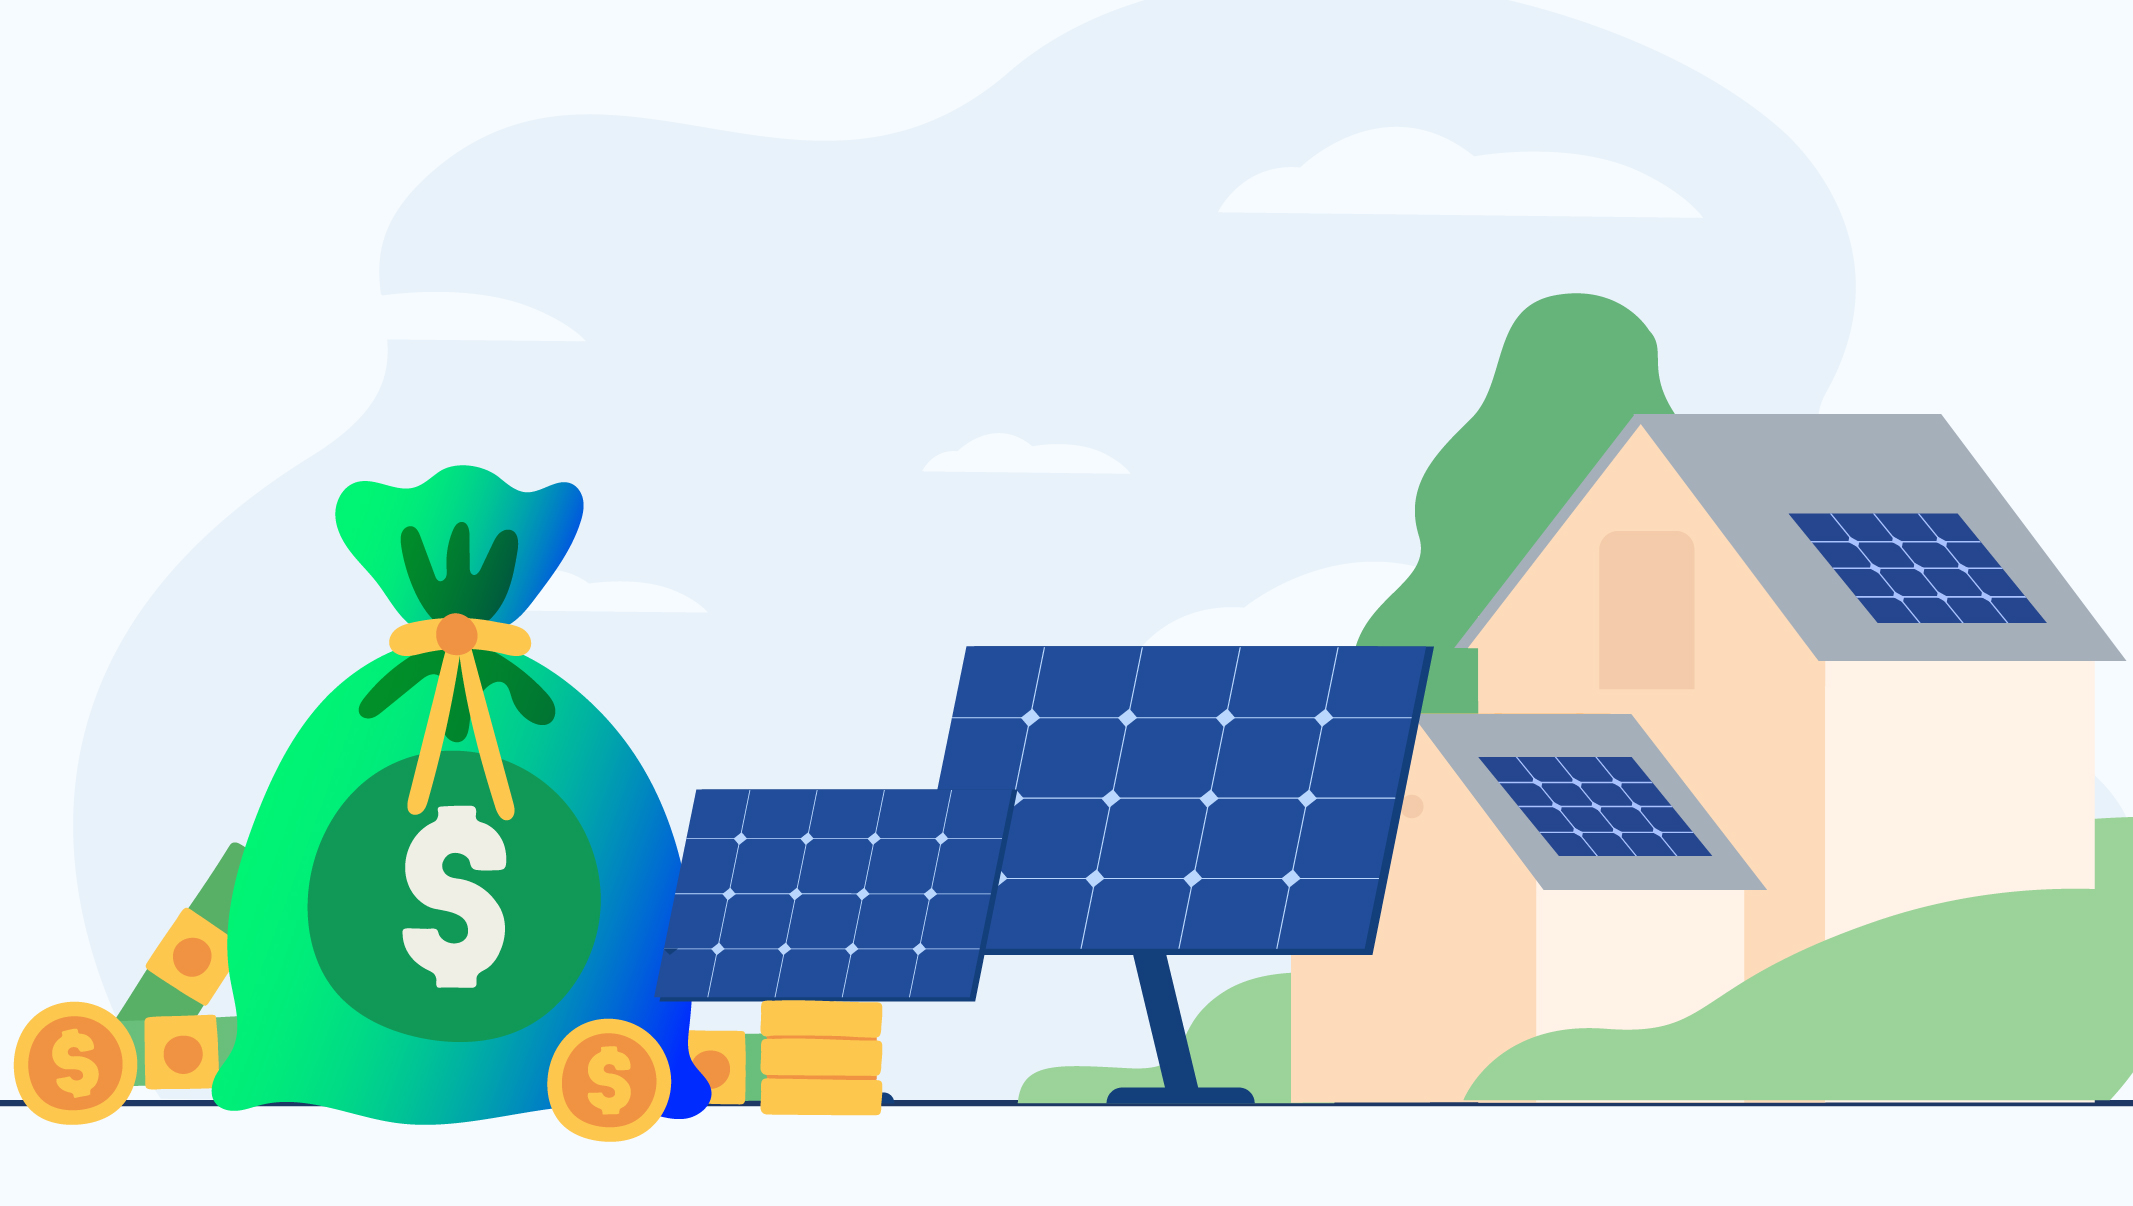 Solar financing guide: What are the options and which one is best for you?